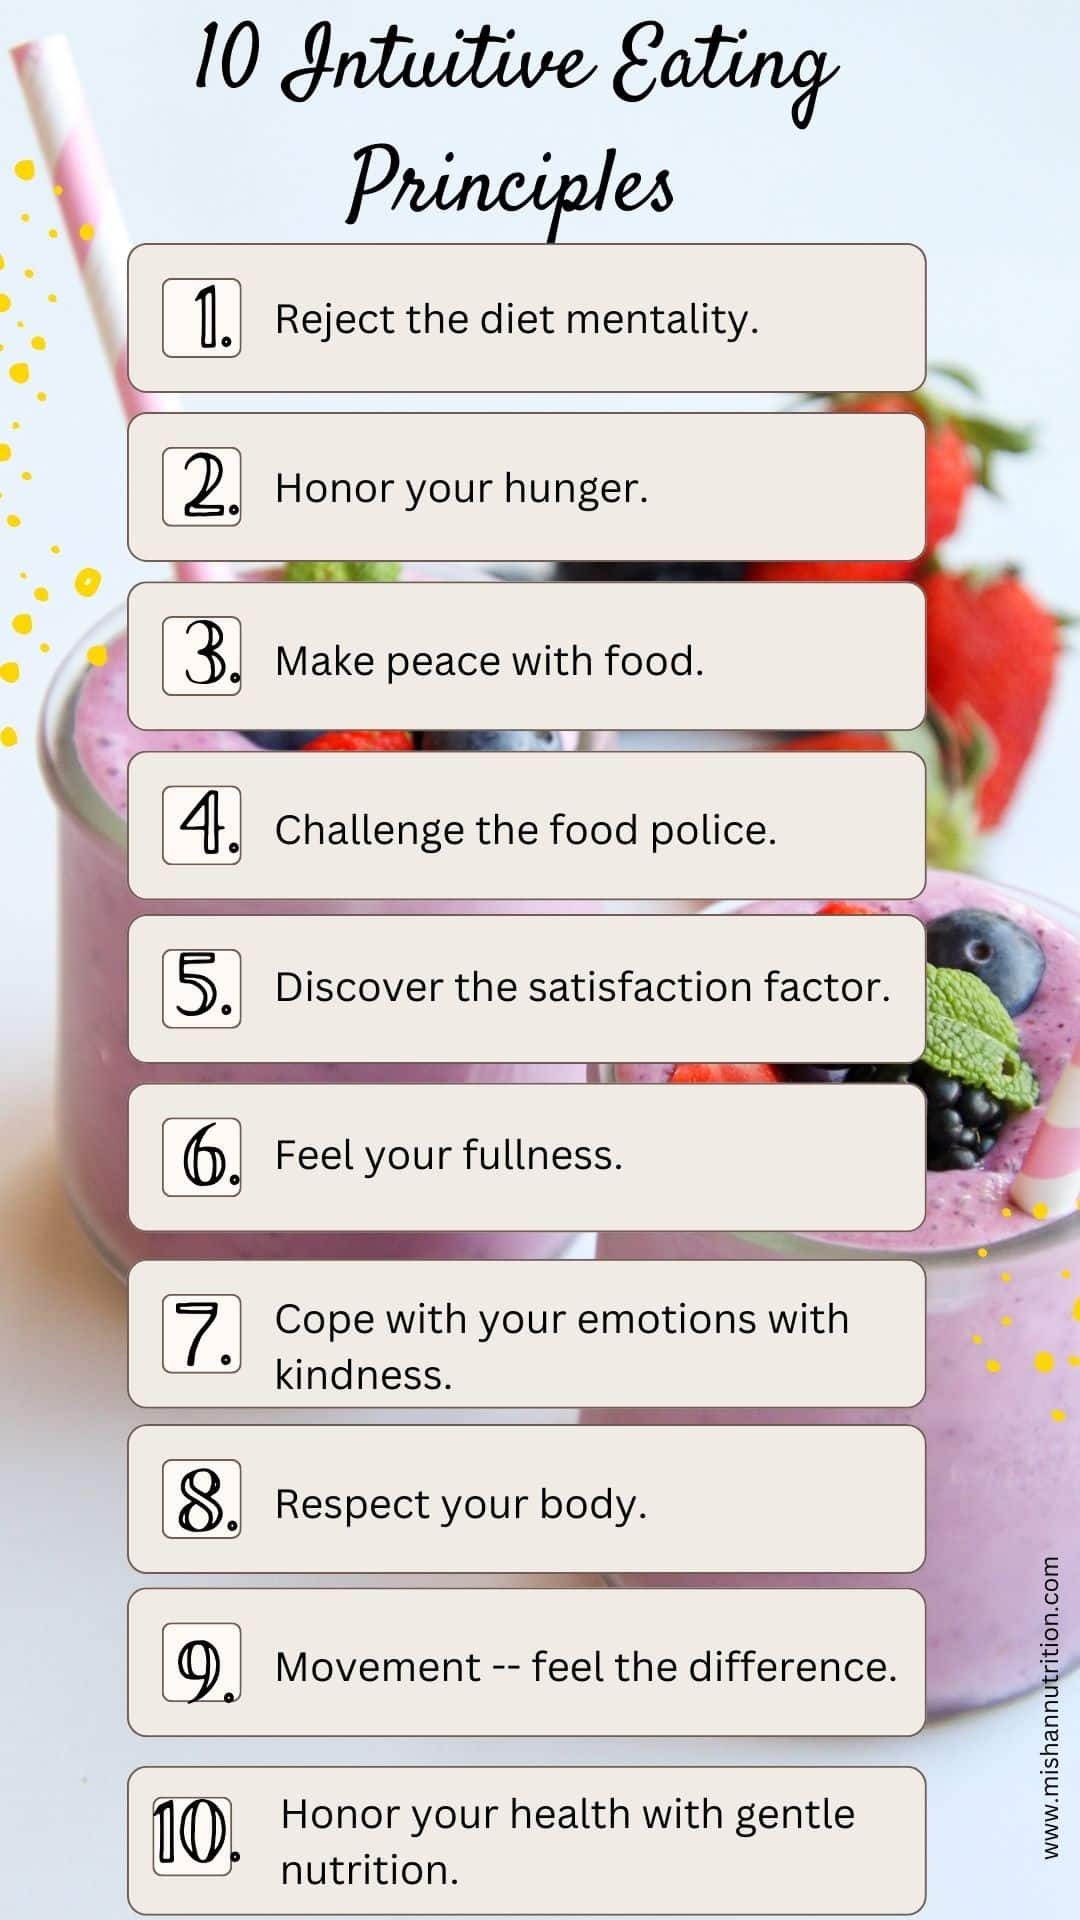 infographic of 10 intuitive eating principles